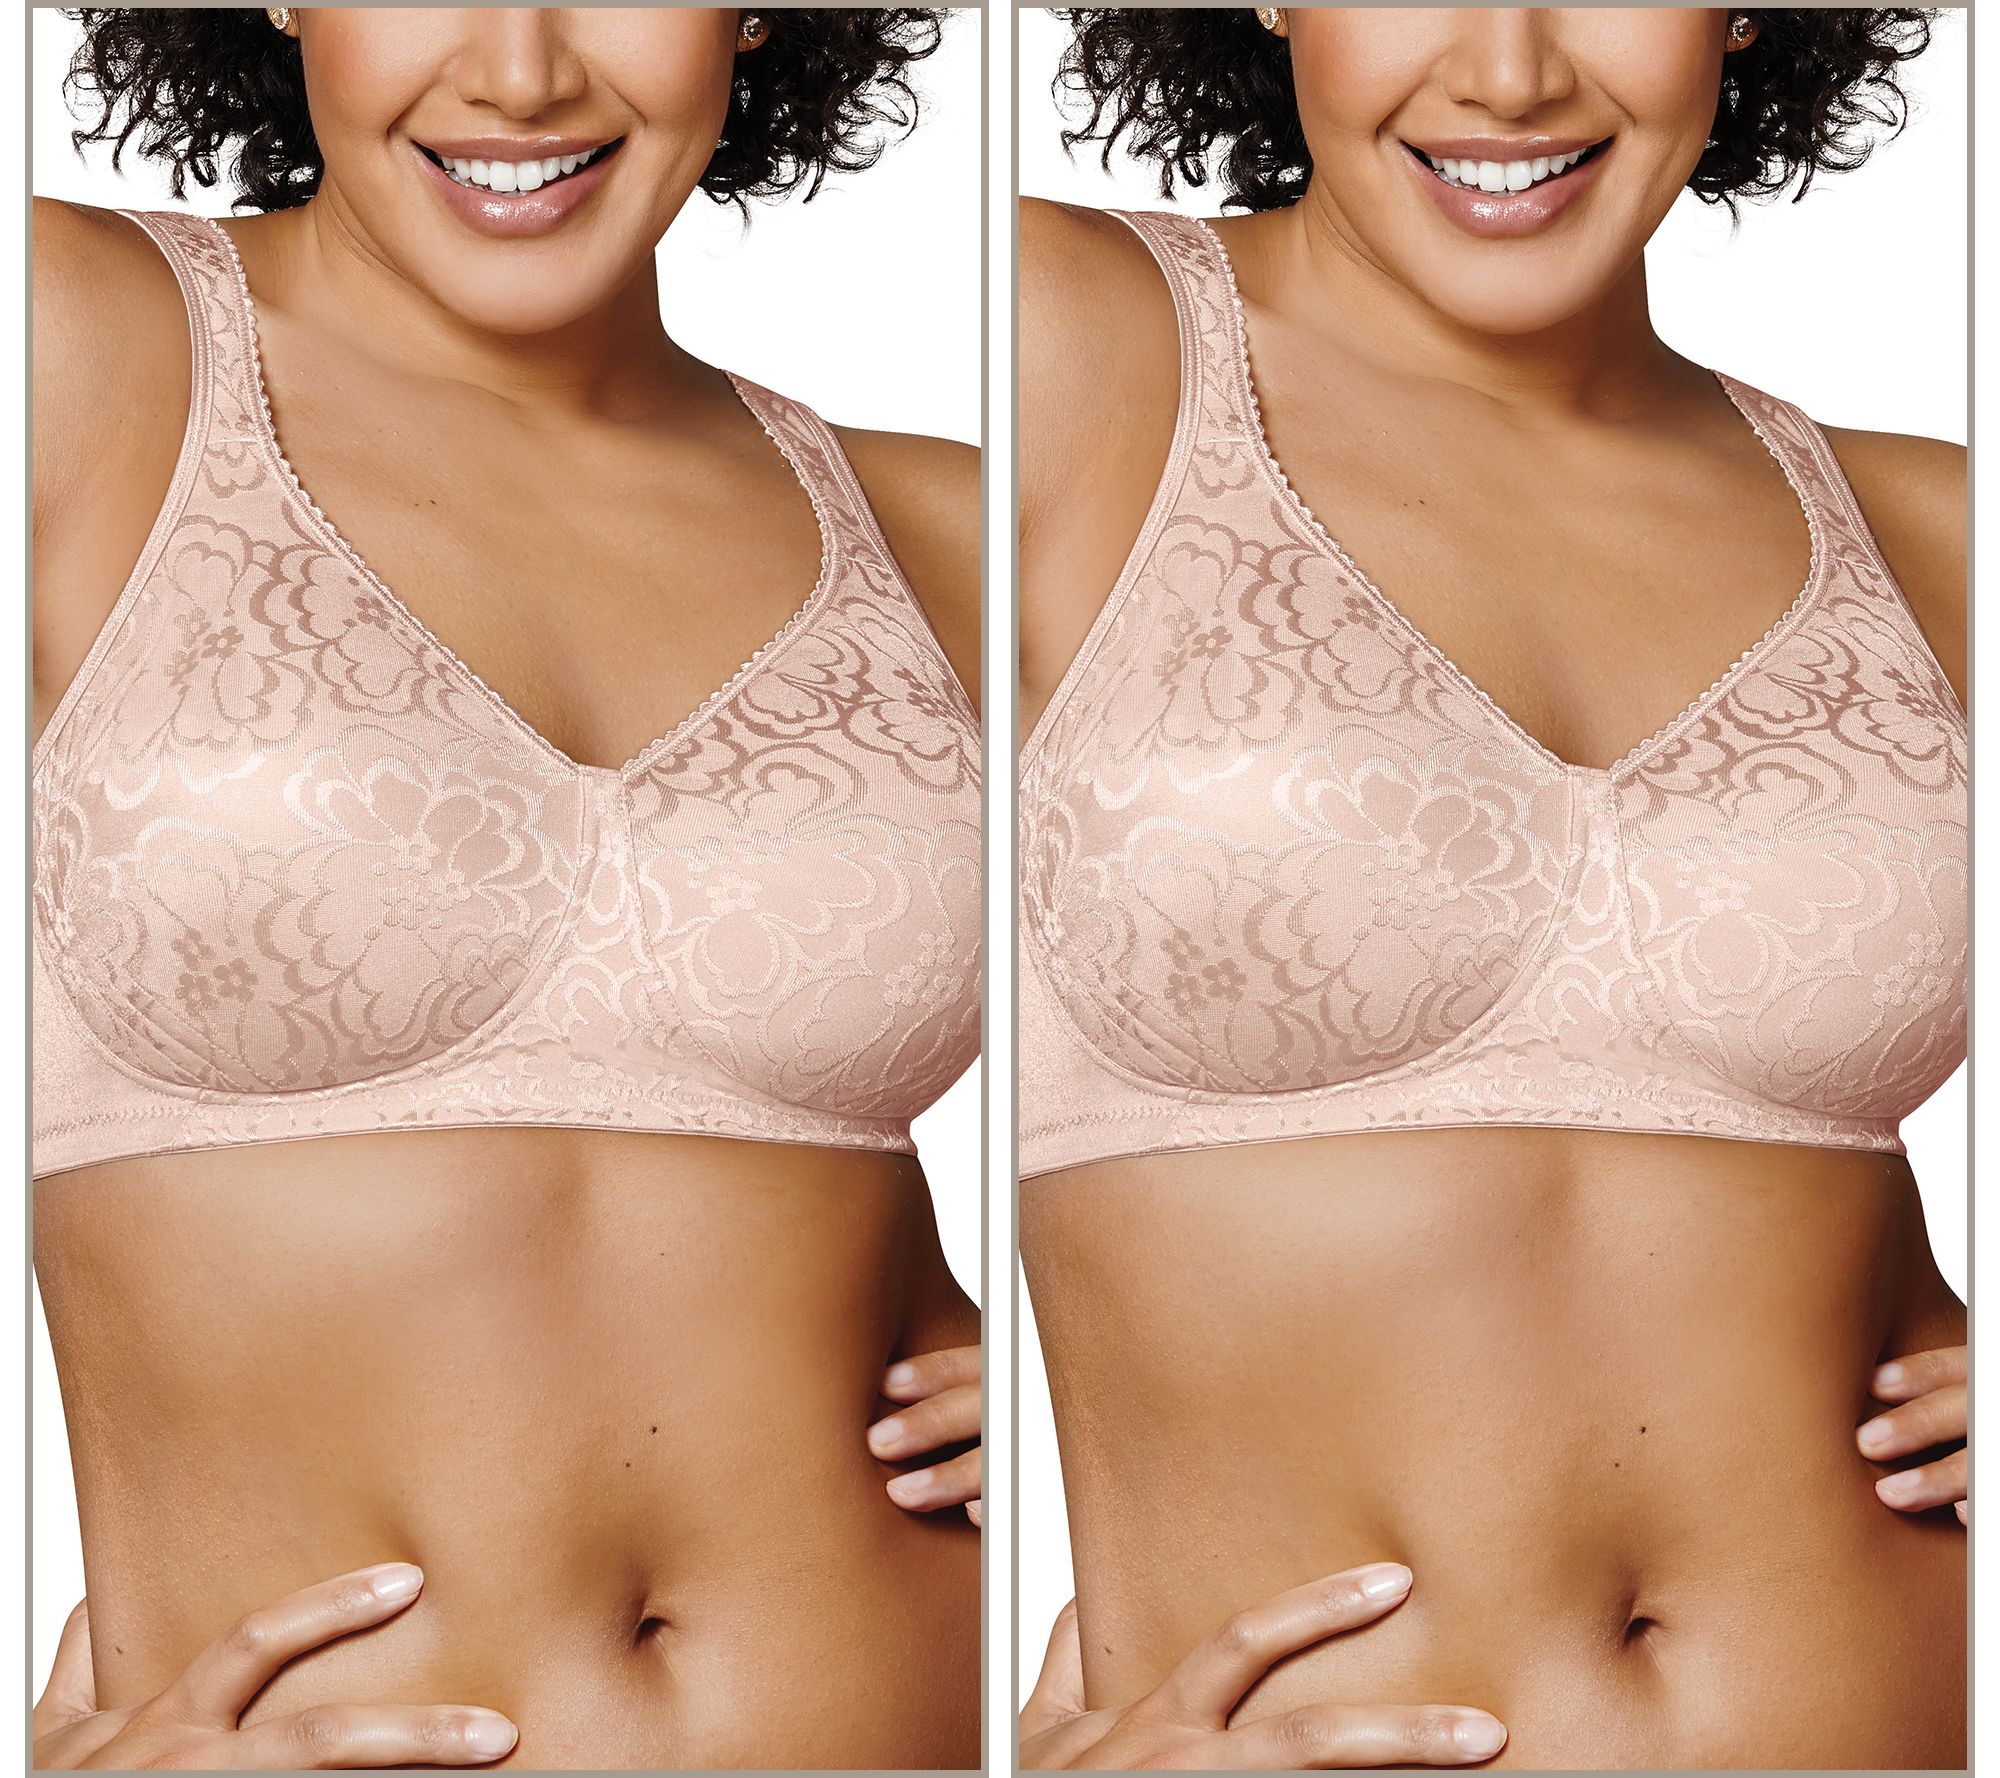 NEW PLAYTEX 18 Hour wirefree BRA ultimate lift and support 4745 GALACTIC RED